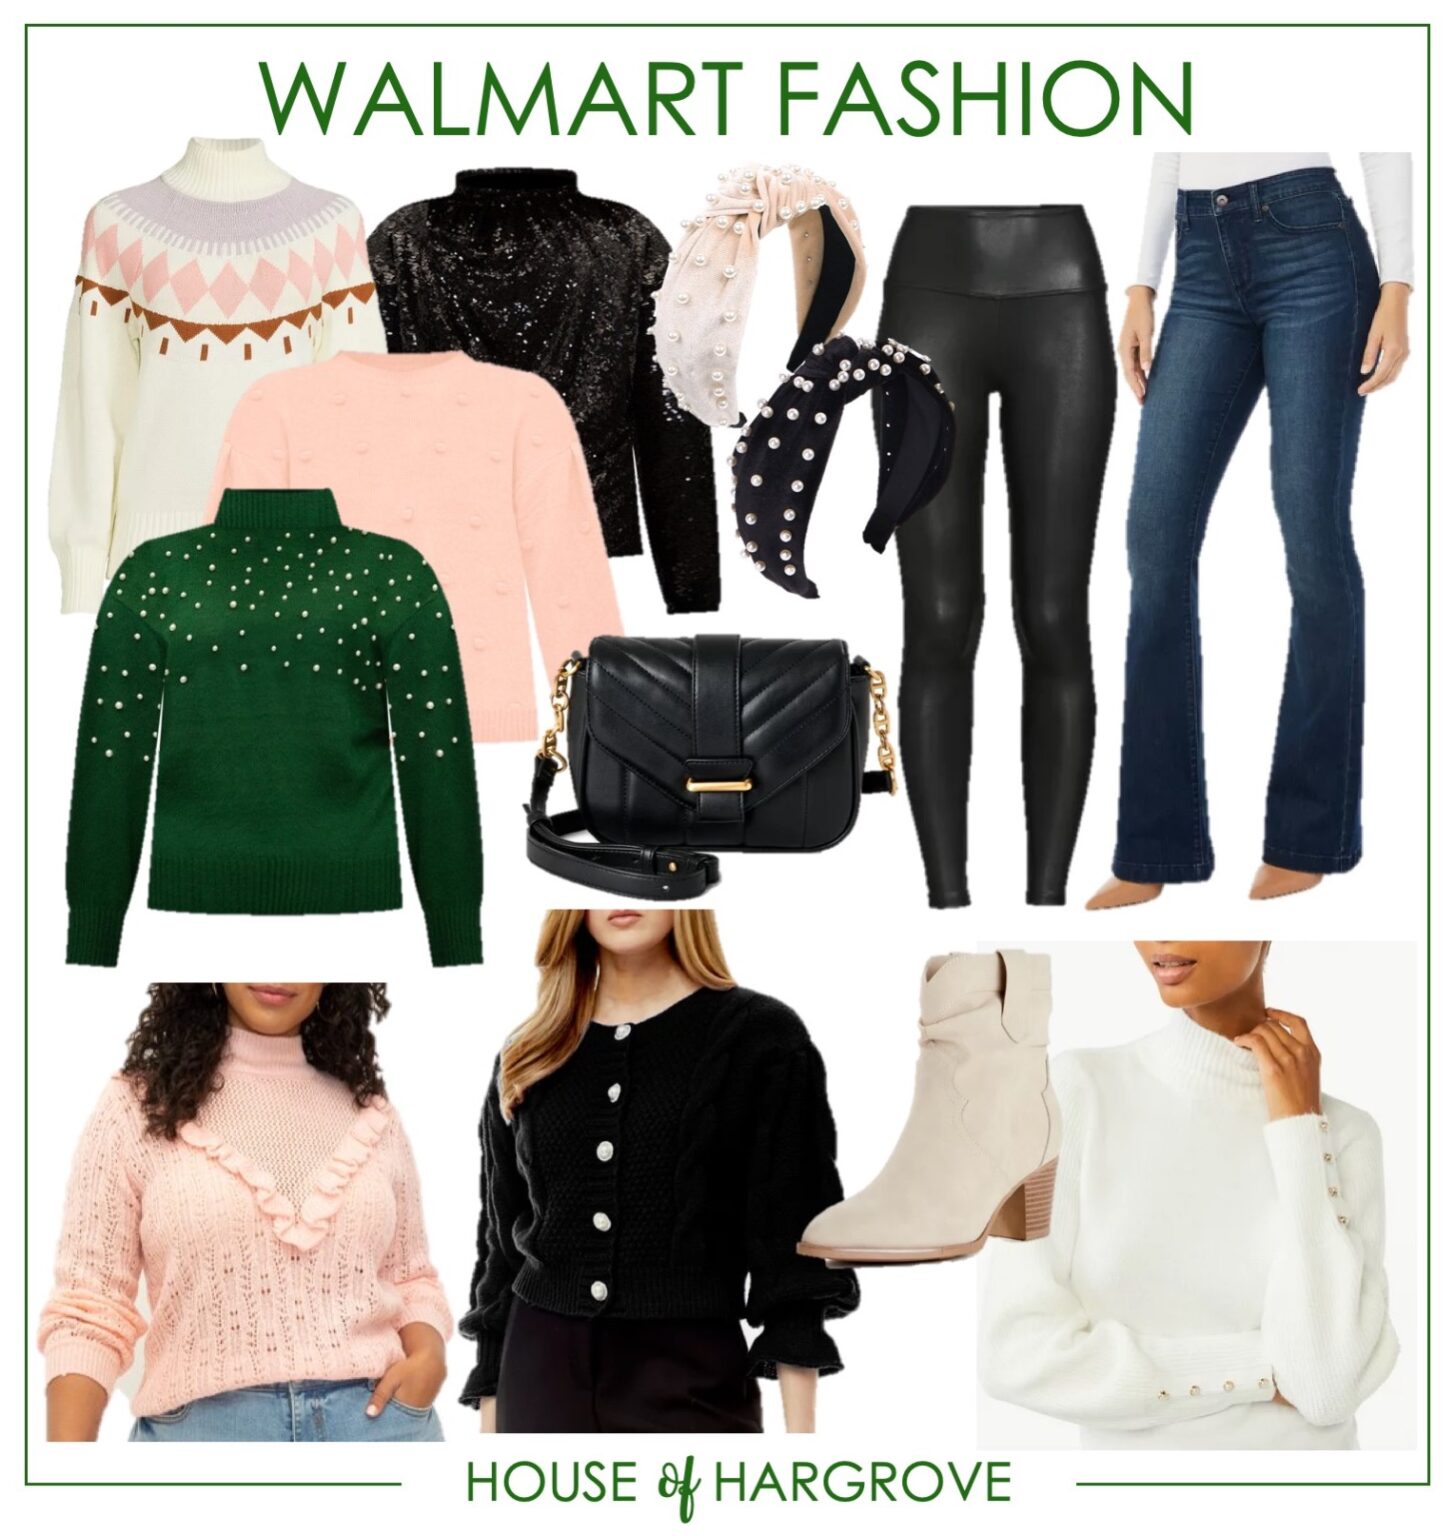 Walmart Fashion Finds - House of Hargrove